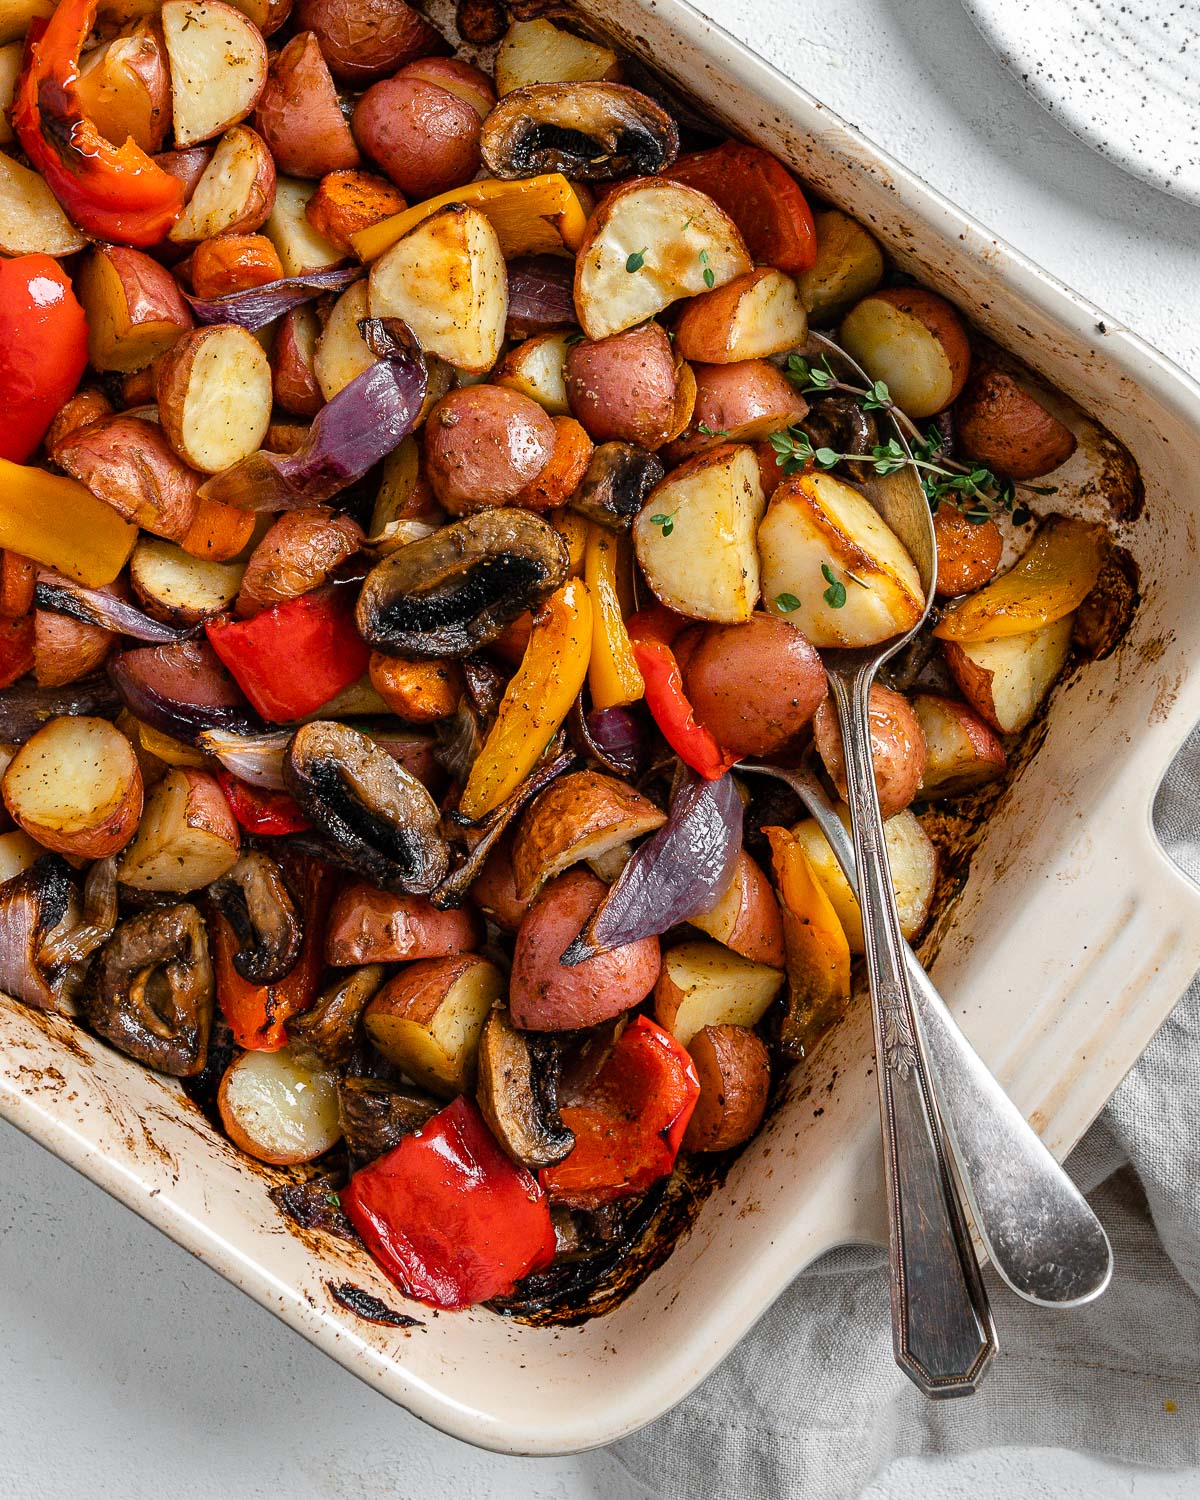 completed Vegan Roasted Vegetables with Thyme in a baking dish against a white background